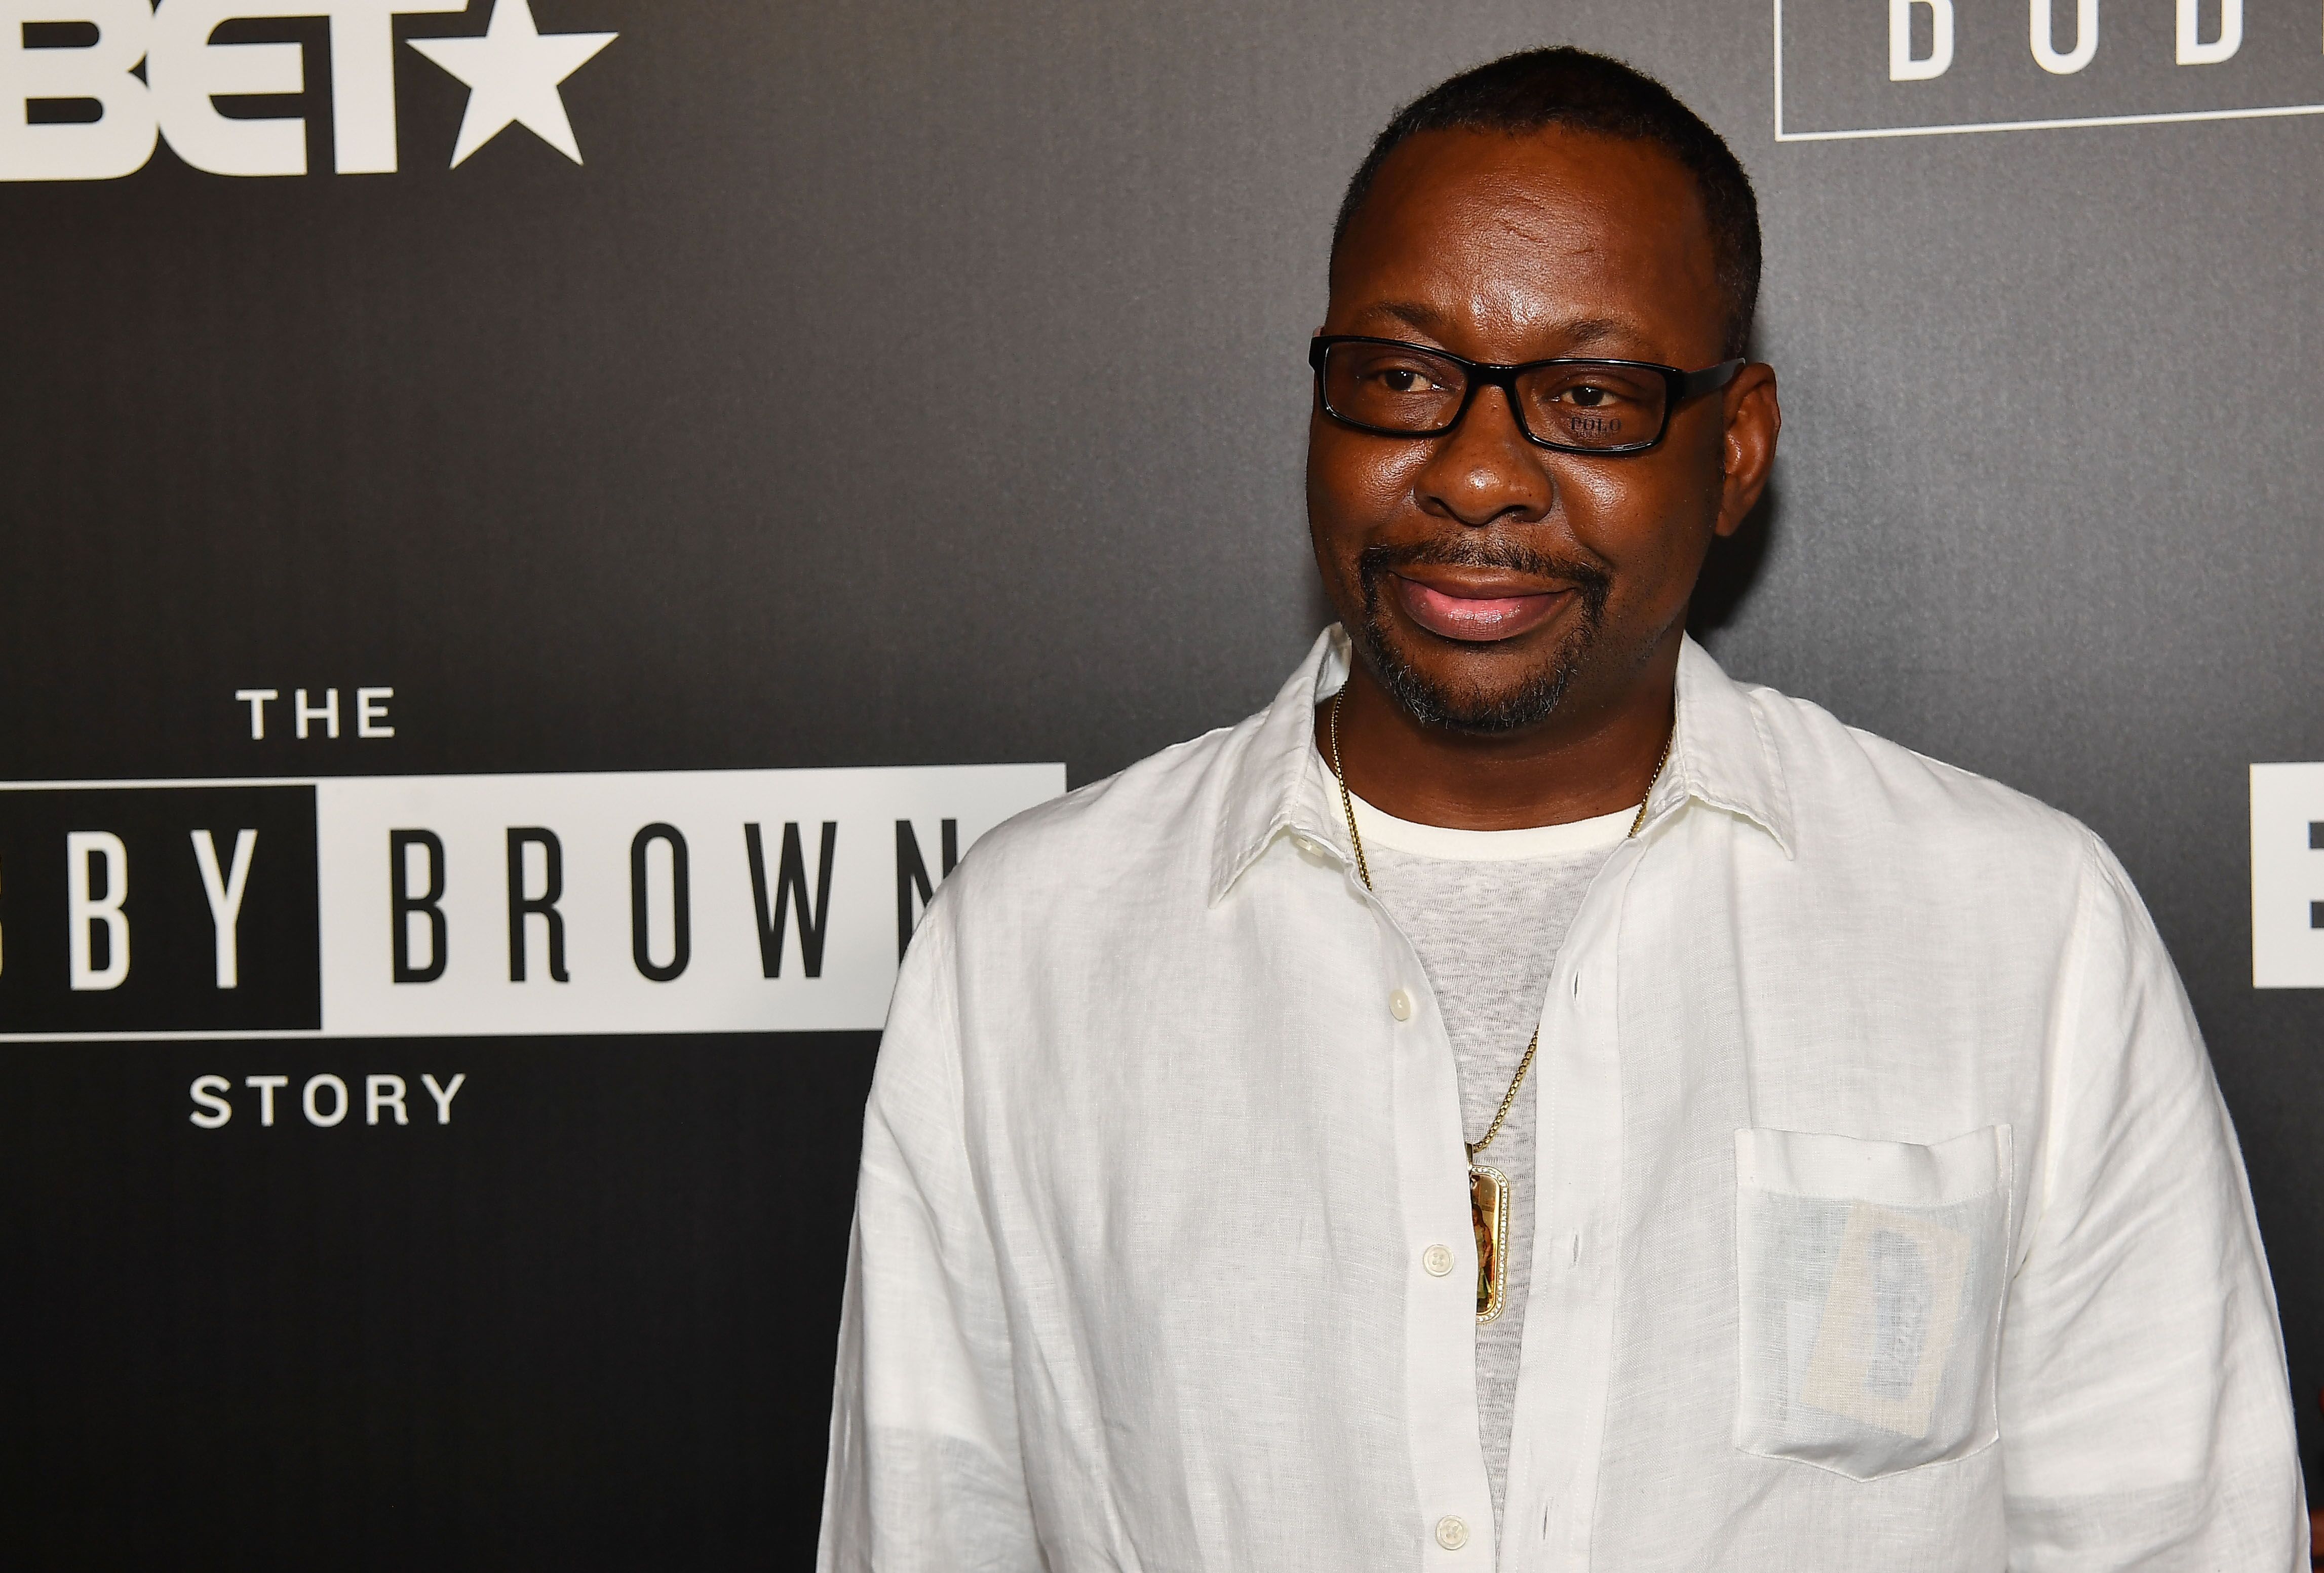 Bobby Brown attends The "Bobby-Q" Atlanta Premiere Of "The Bobby Brown Story" at Atlanta Contemporary Arts Center. | Source: Getty Images